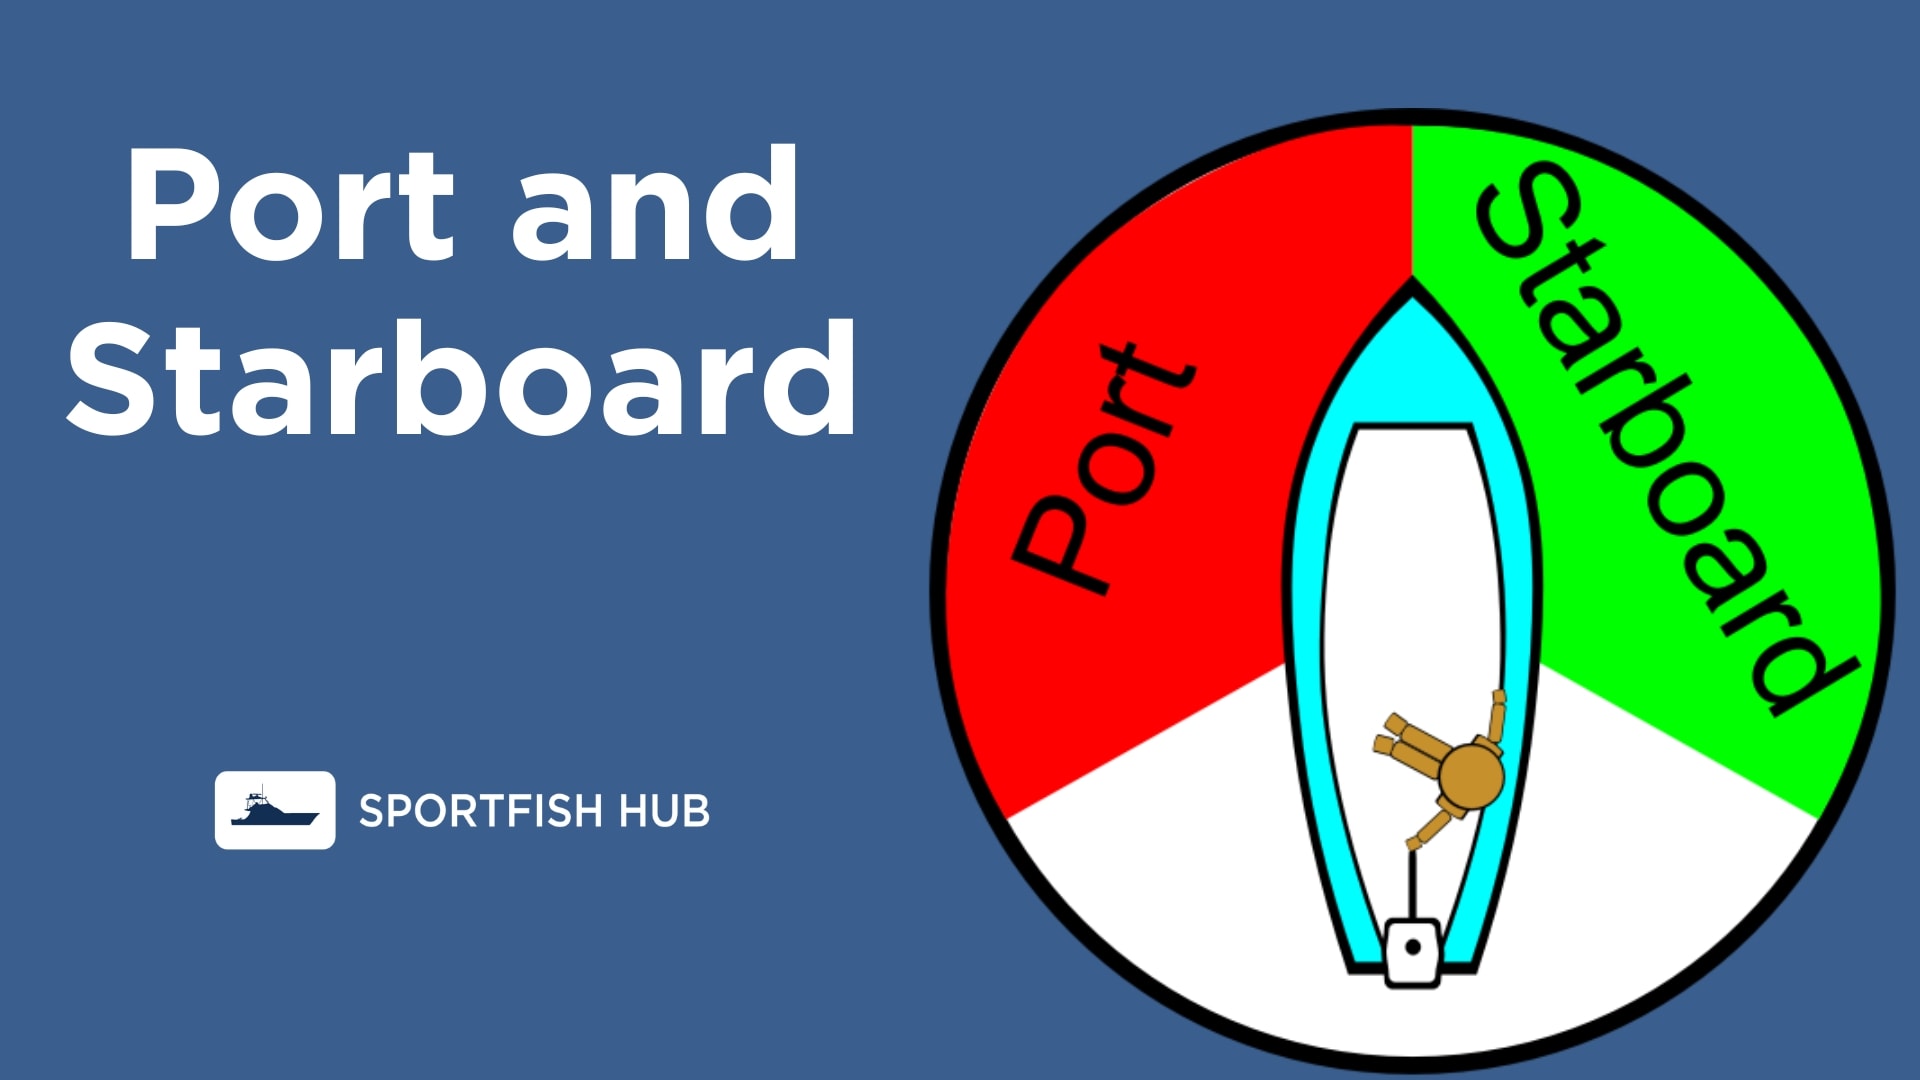 Port & Starboard: Which is Which, and Why?